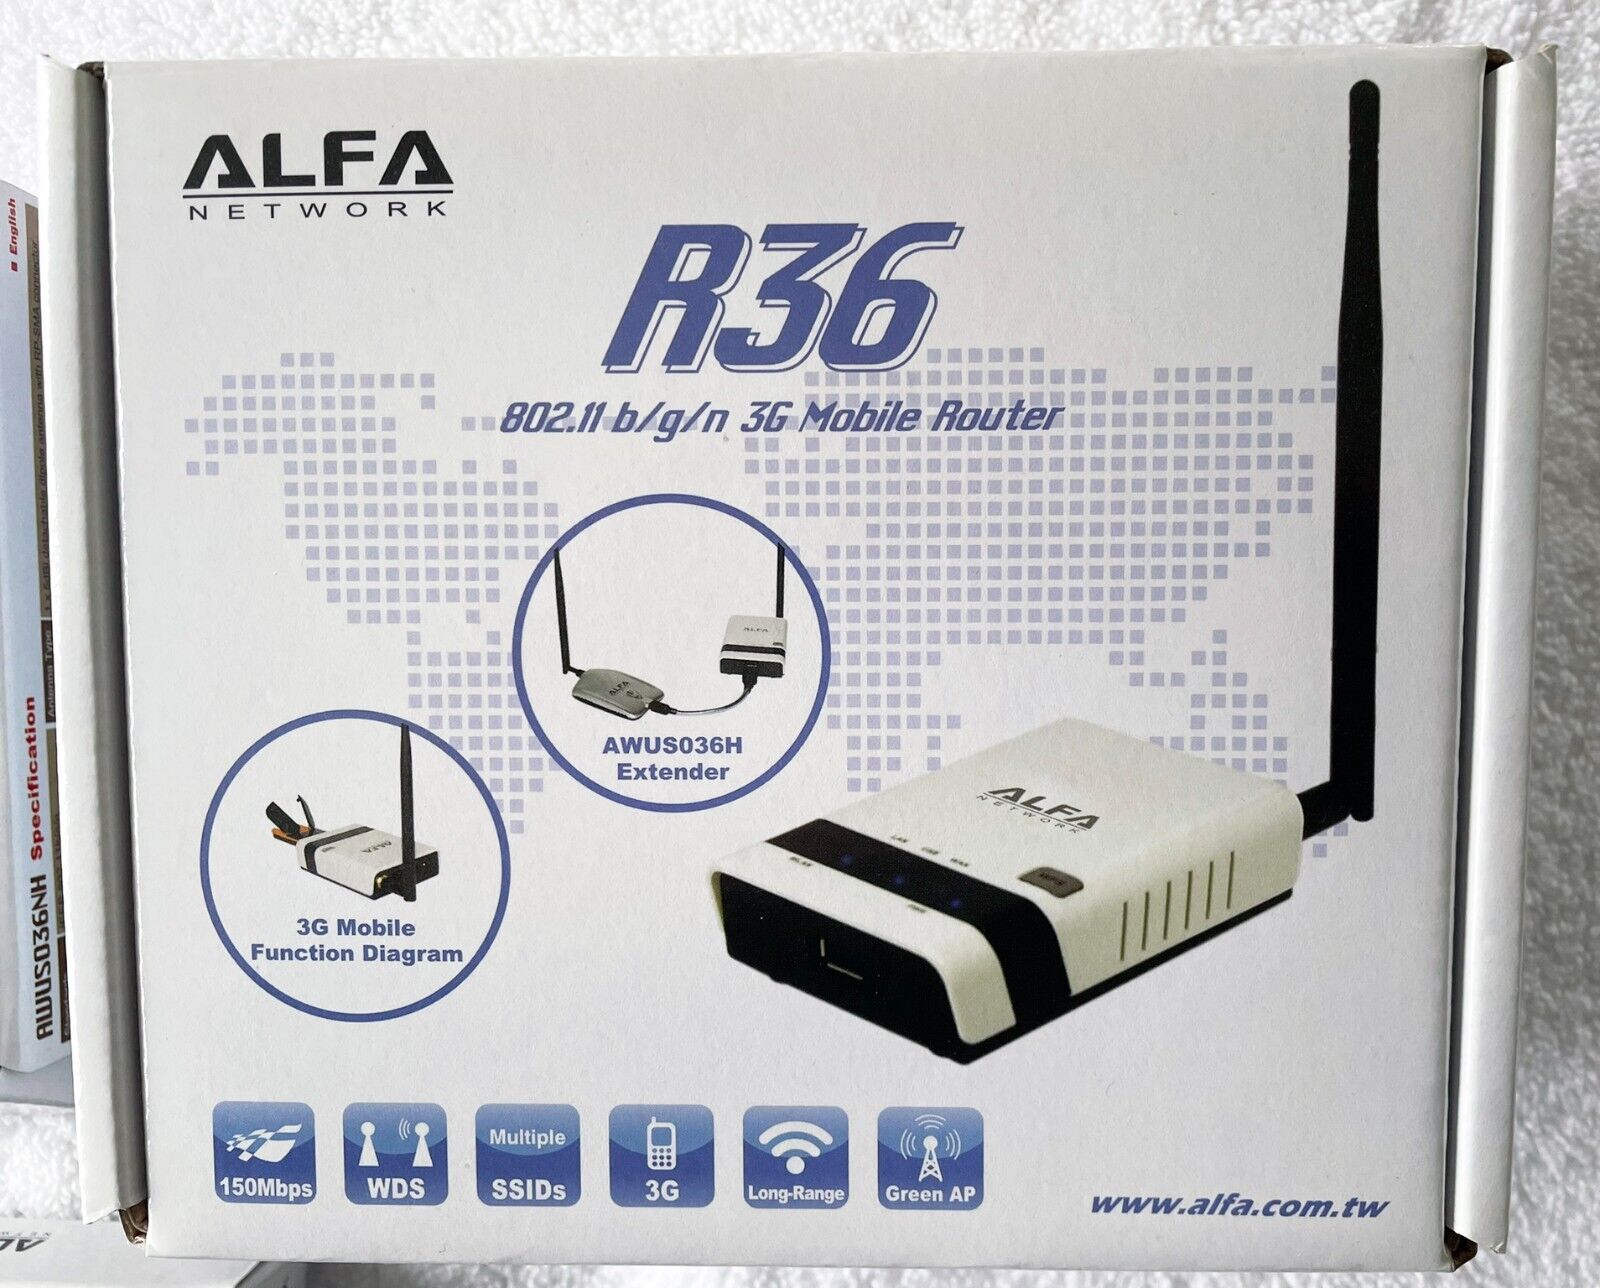 ALFA Network R36 802.11 b/g/n 3G Mobile Router and Panel Antenna